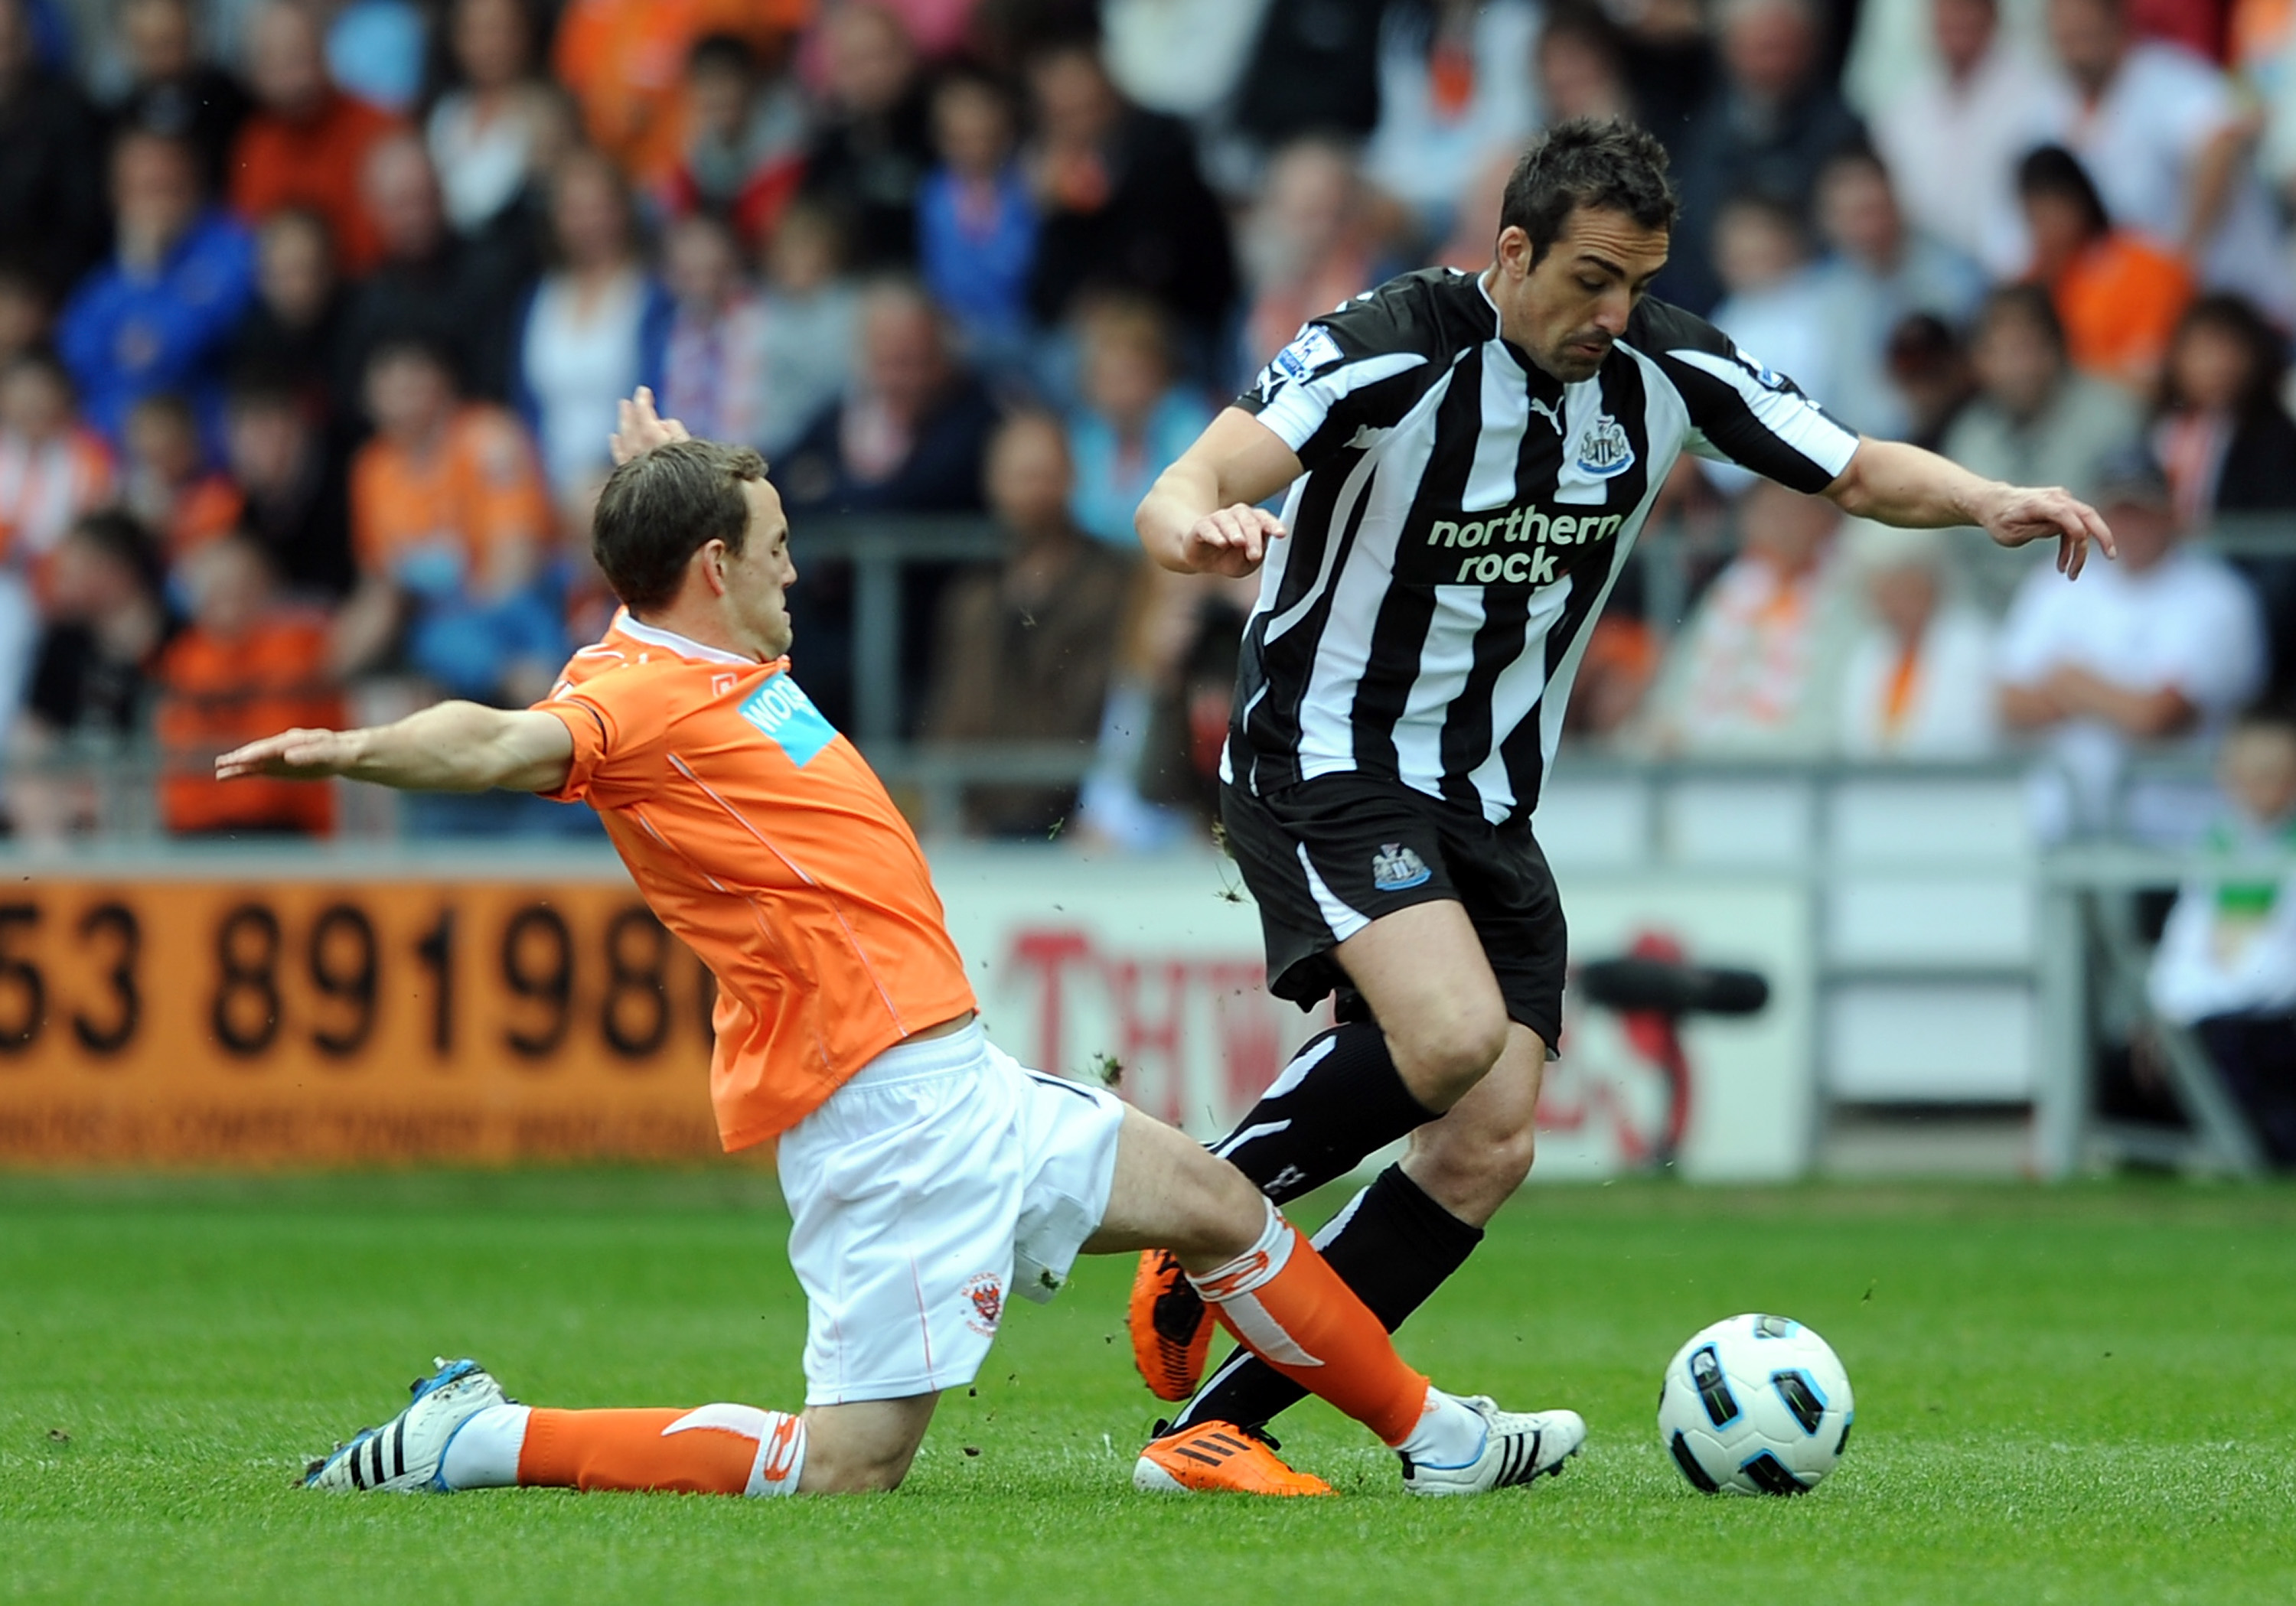 BLACKPOOL, ENGLAND - APRIL 23:  David Vaughan of Blackpool challenges Jose Enrique of Newcastle United during the Barclays Premier League match between Blackpool and Newcastle United at Bloomfield Road on April 23, 2011 in Blackpool, England.  (Photo by C